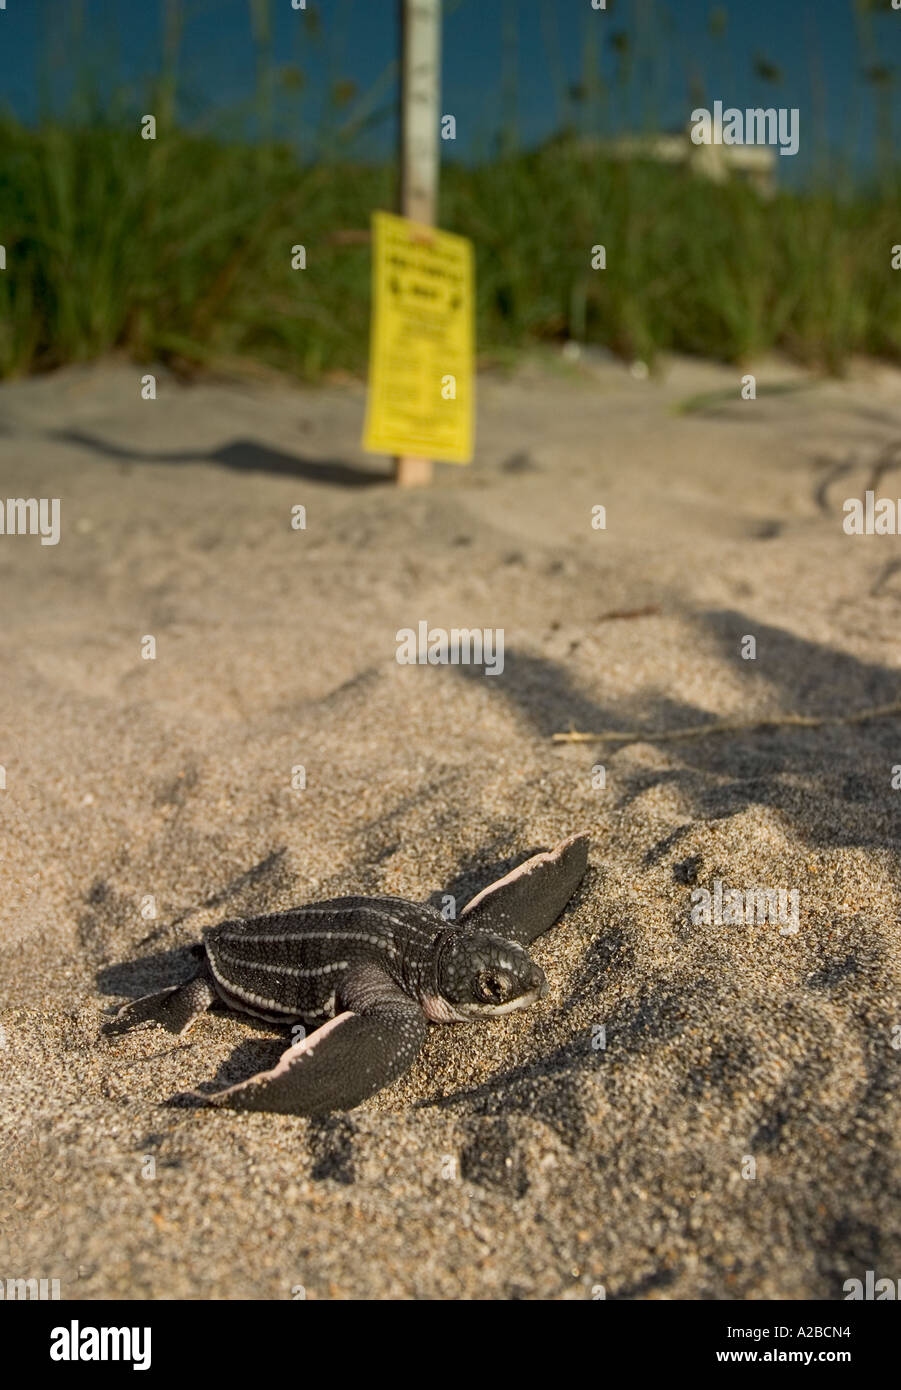 Leatherback sea turtle hatchling leaves a nest marked for evaluation Stock Photo